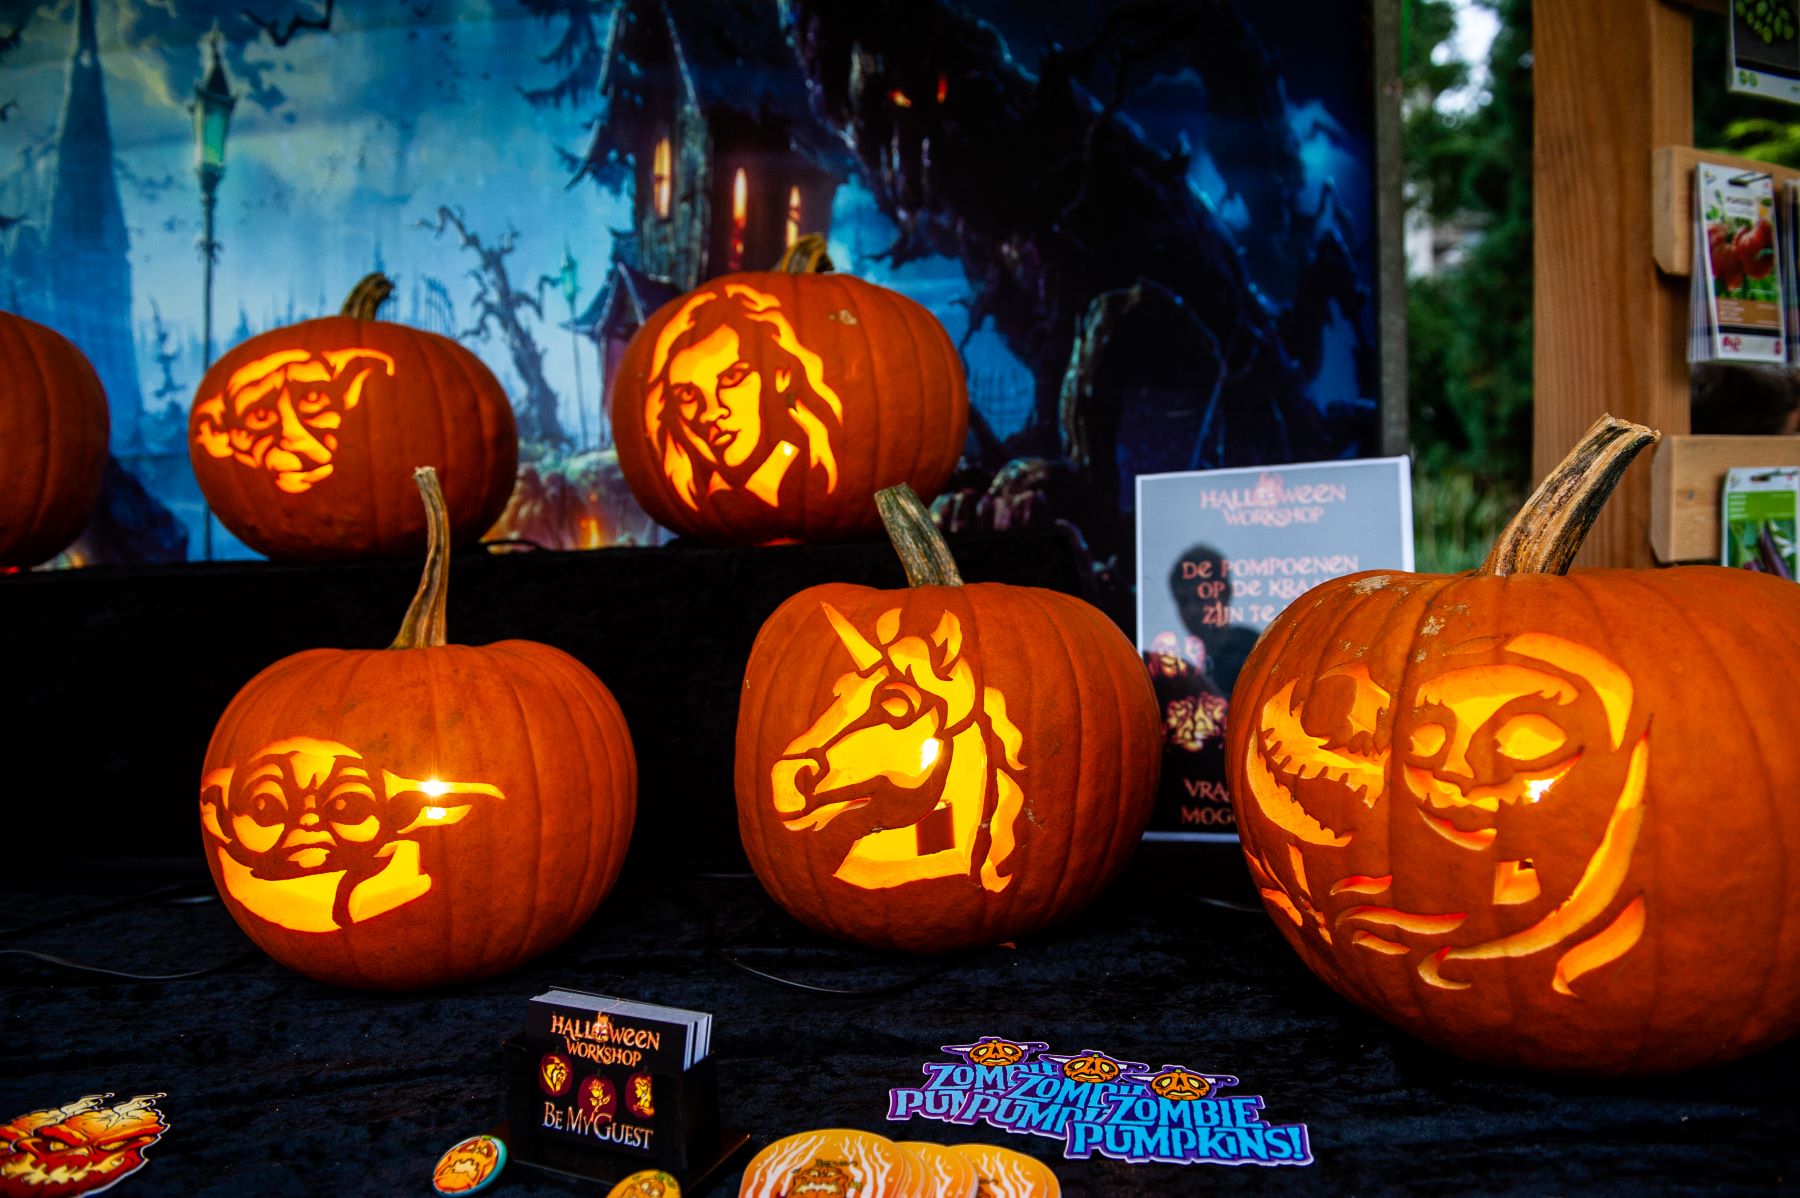 A collection of carved pumpkins decorated for Halloween